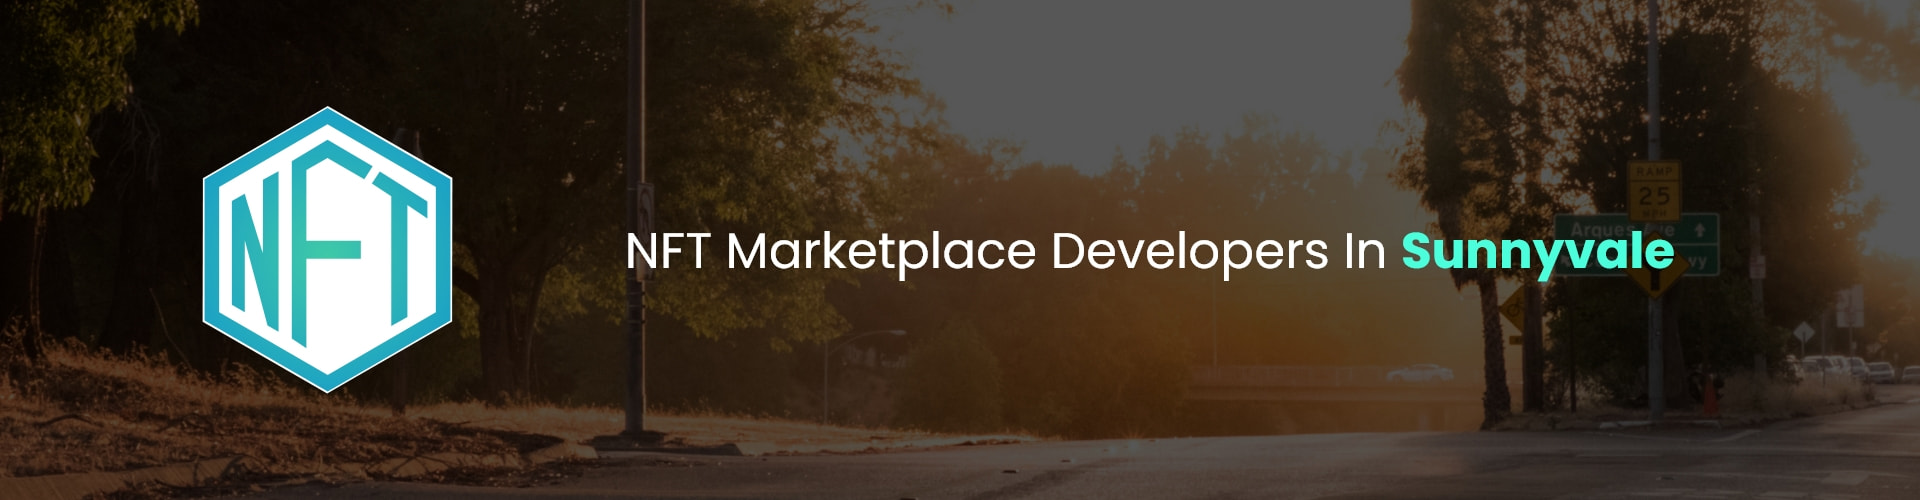 hire nft marketplace developers in sunnyvale